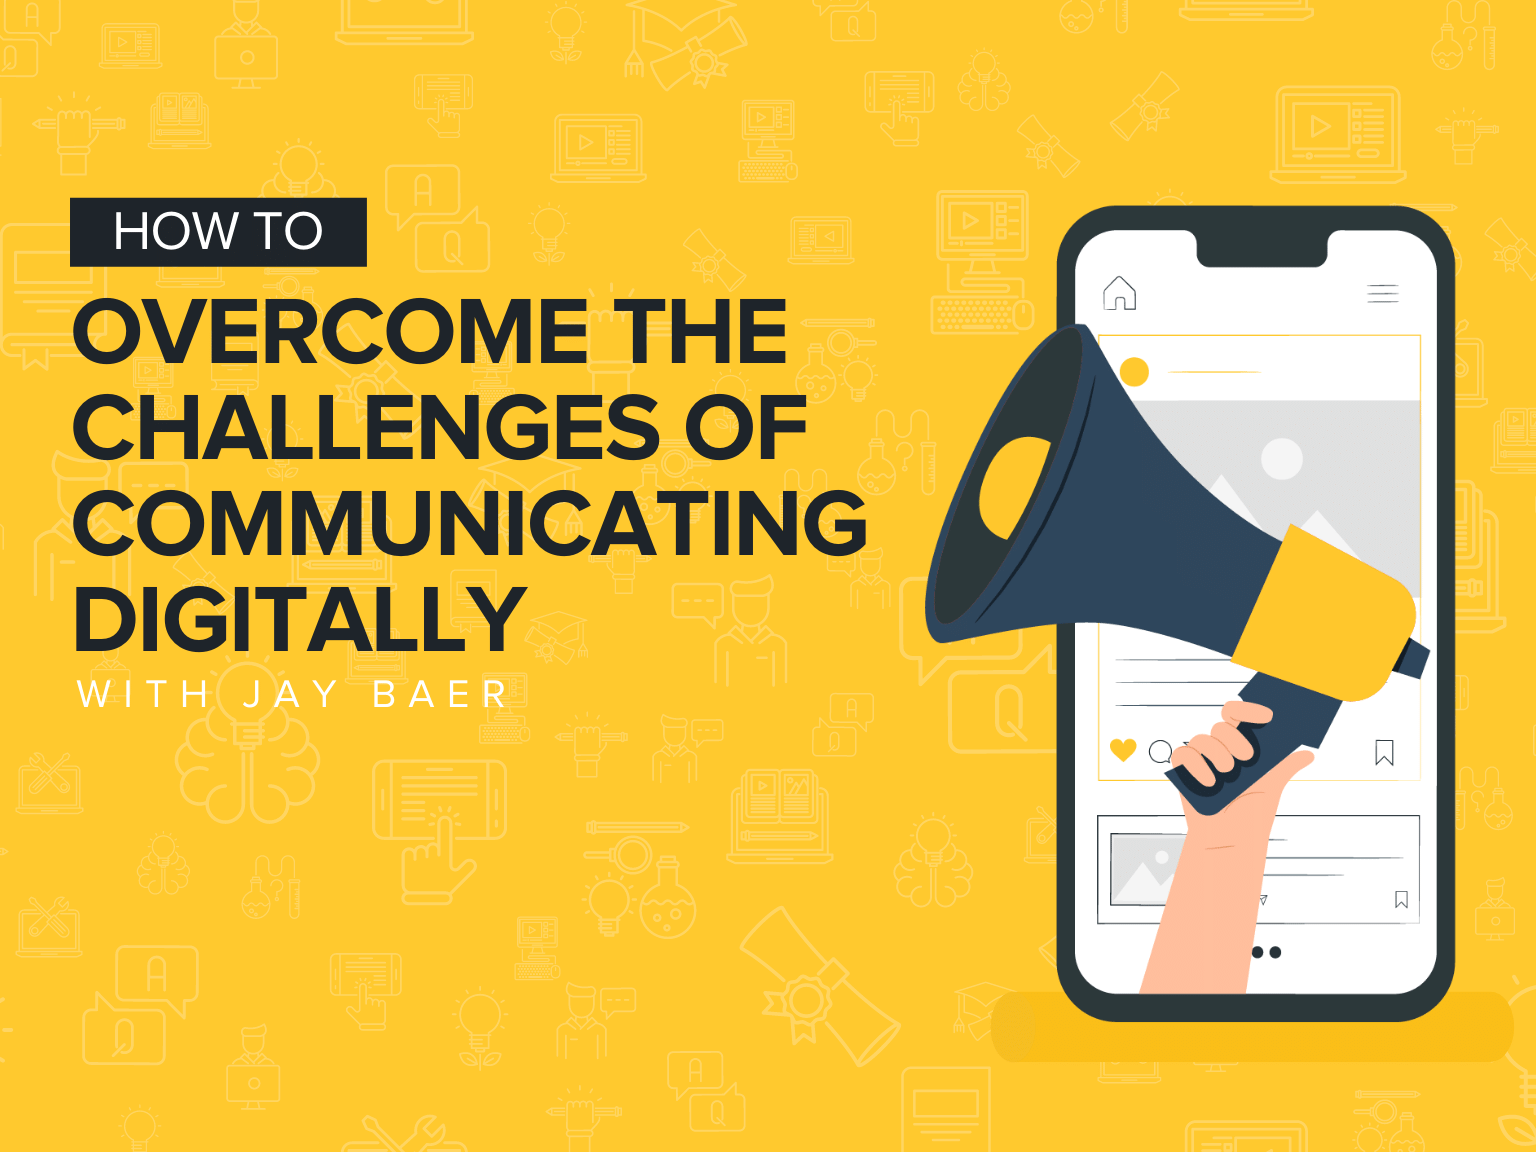 How To Overcome the Challenges of Communicating Digitally With Jay Baer